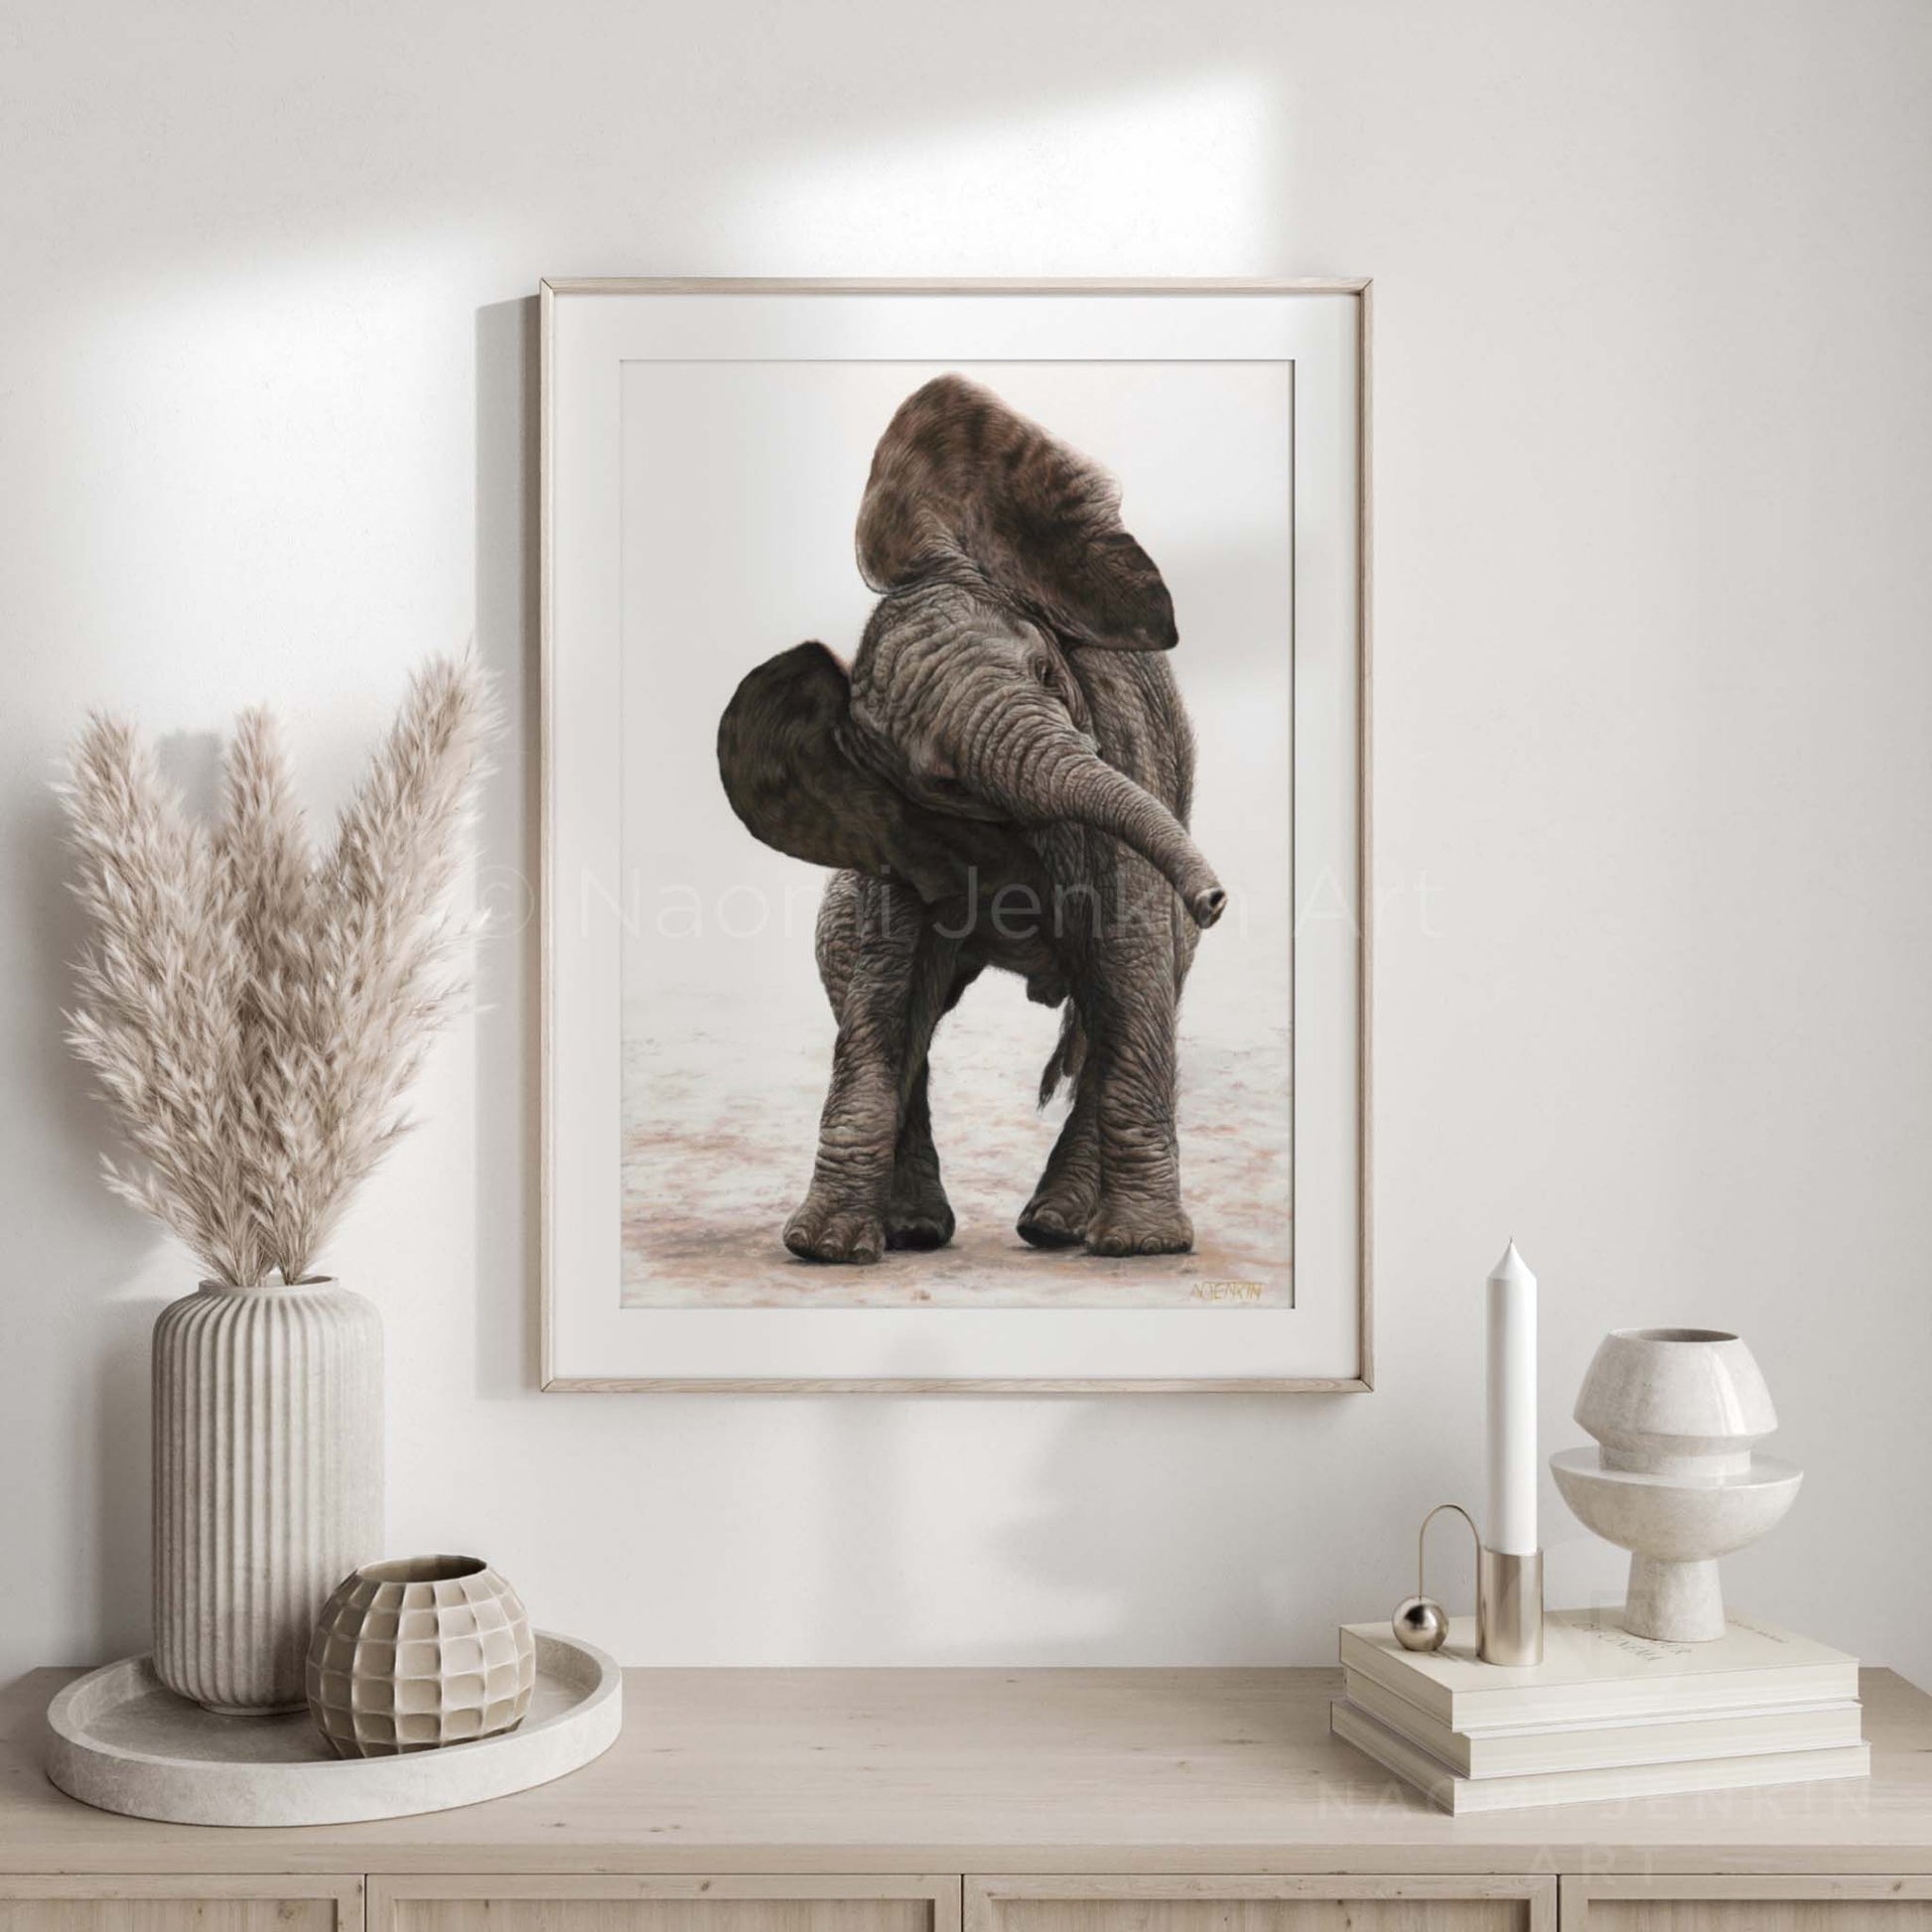 African elephant art print by Naomi Jenkin Art in a white wooden frame